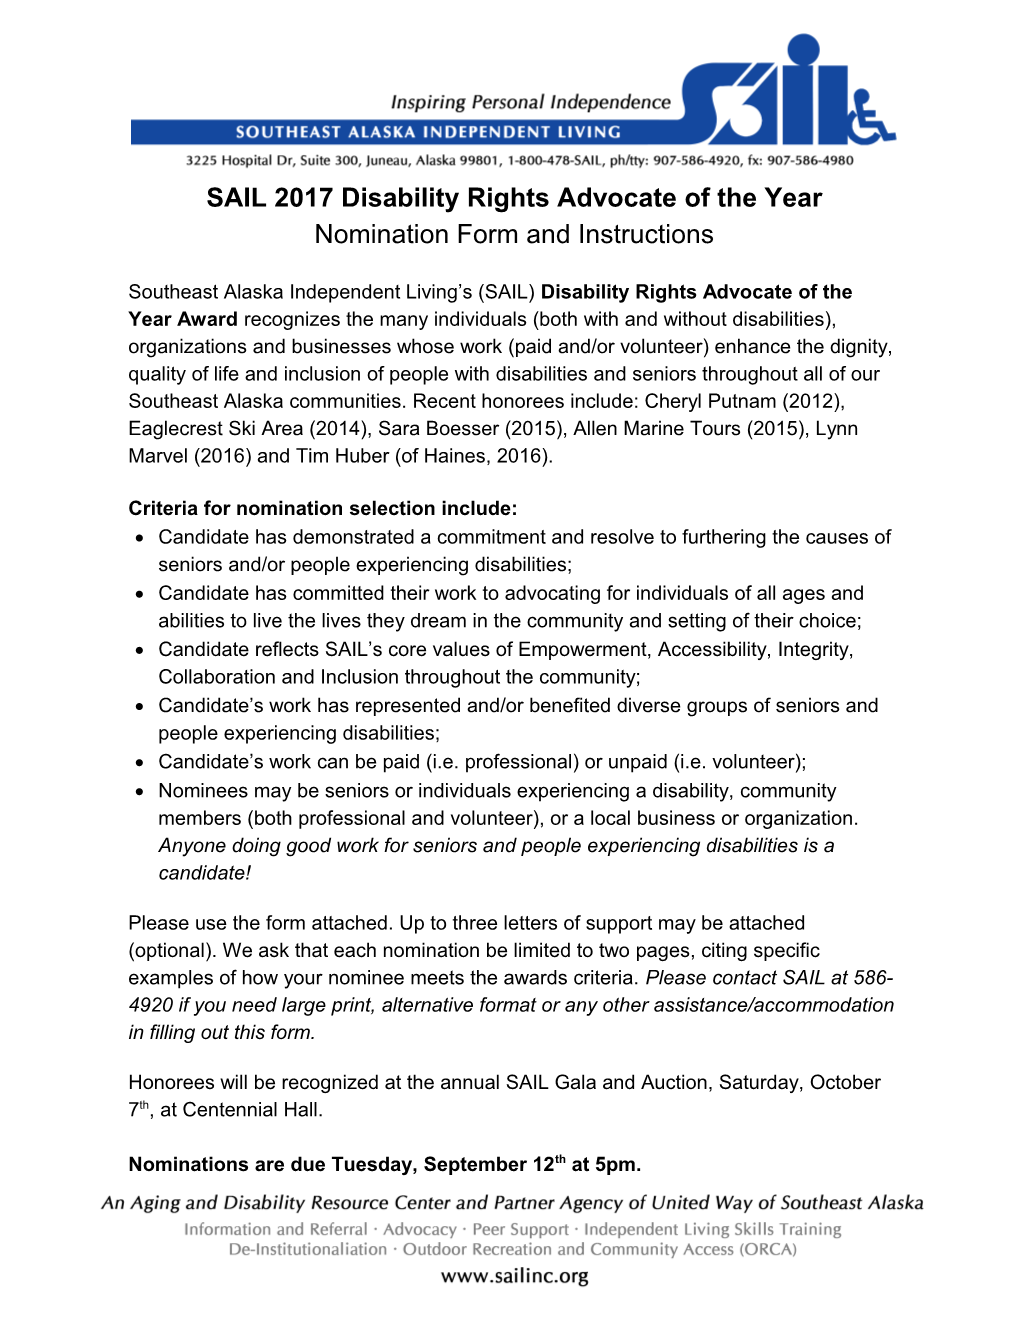 SAIL 2017 Disability Rights Advocate of the Year